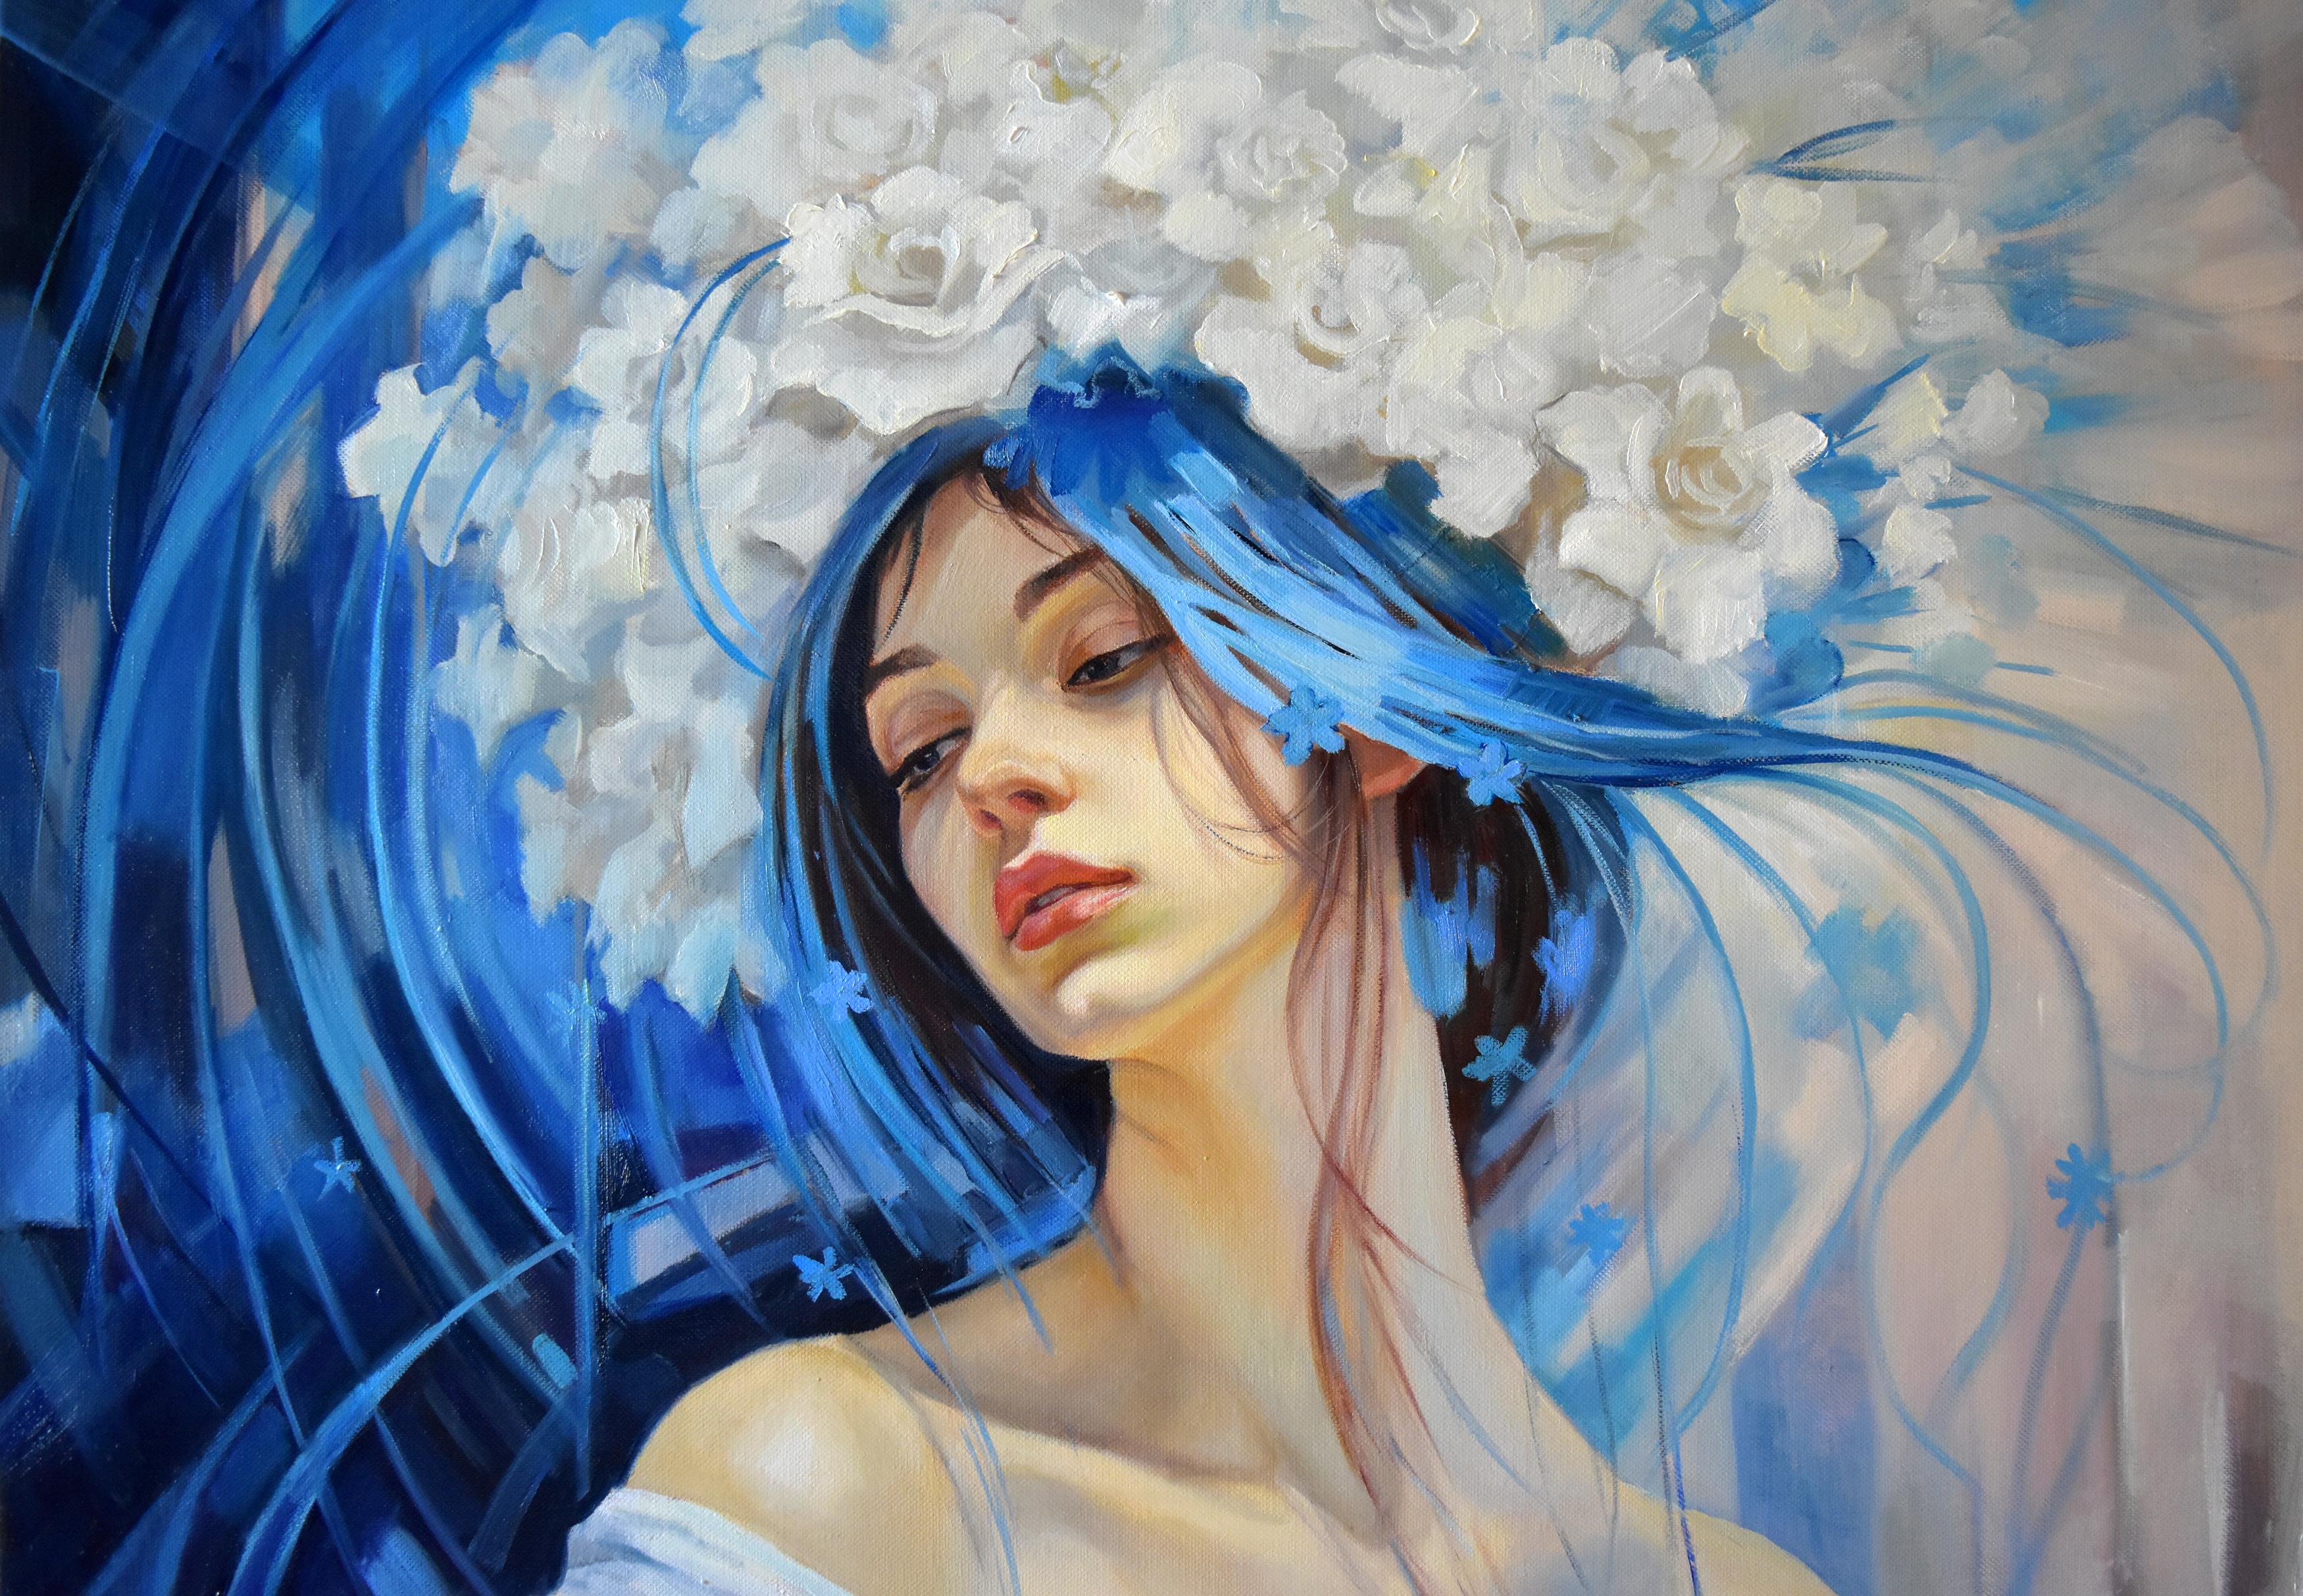 Large contrasting portrait of a fairy Fantasy. A beautiful fantasy woman portrait with abstract background. Original oil painting on linen canvas. Combination of oil paints with acrylic underpainting.